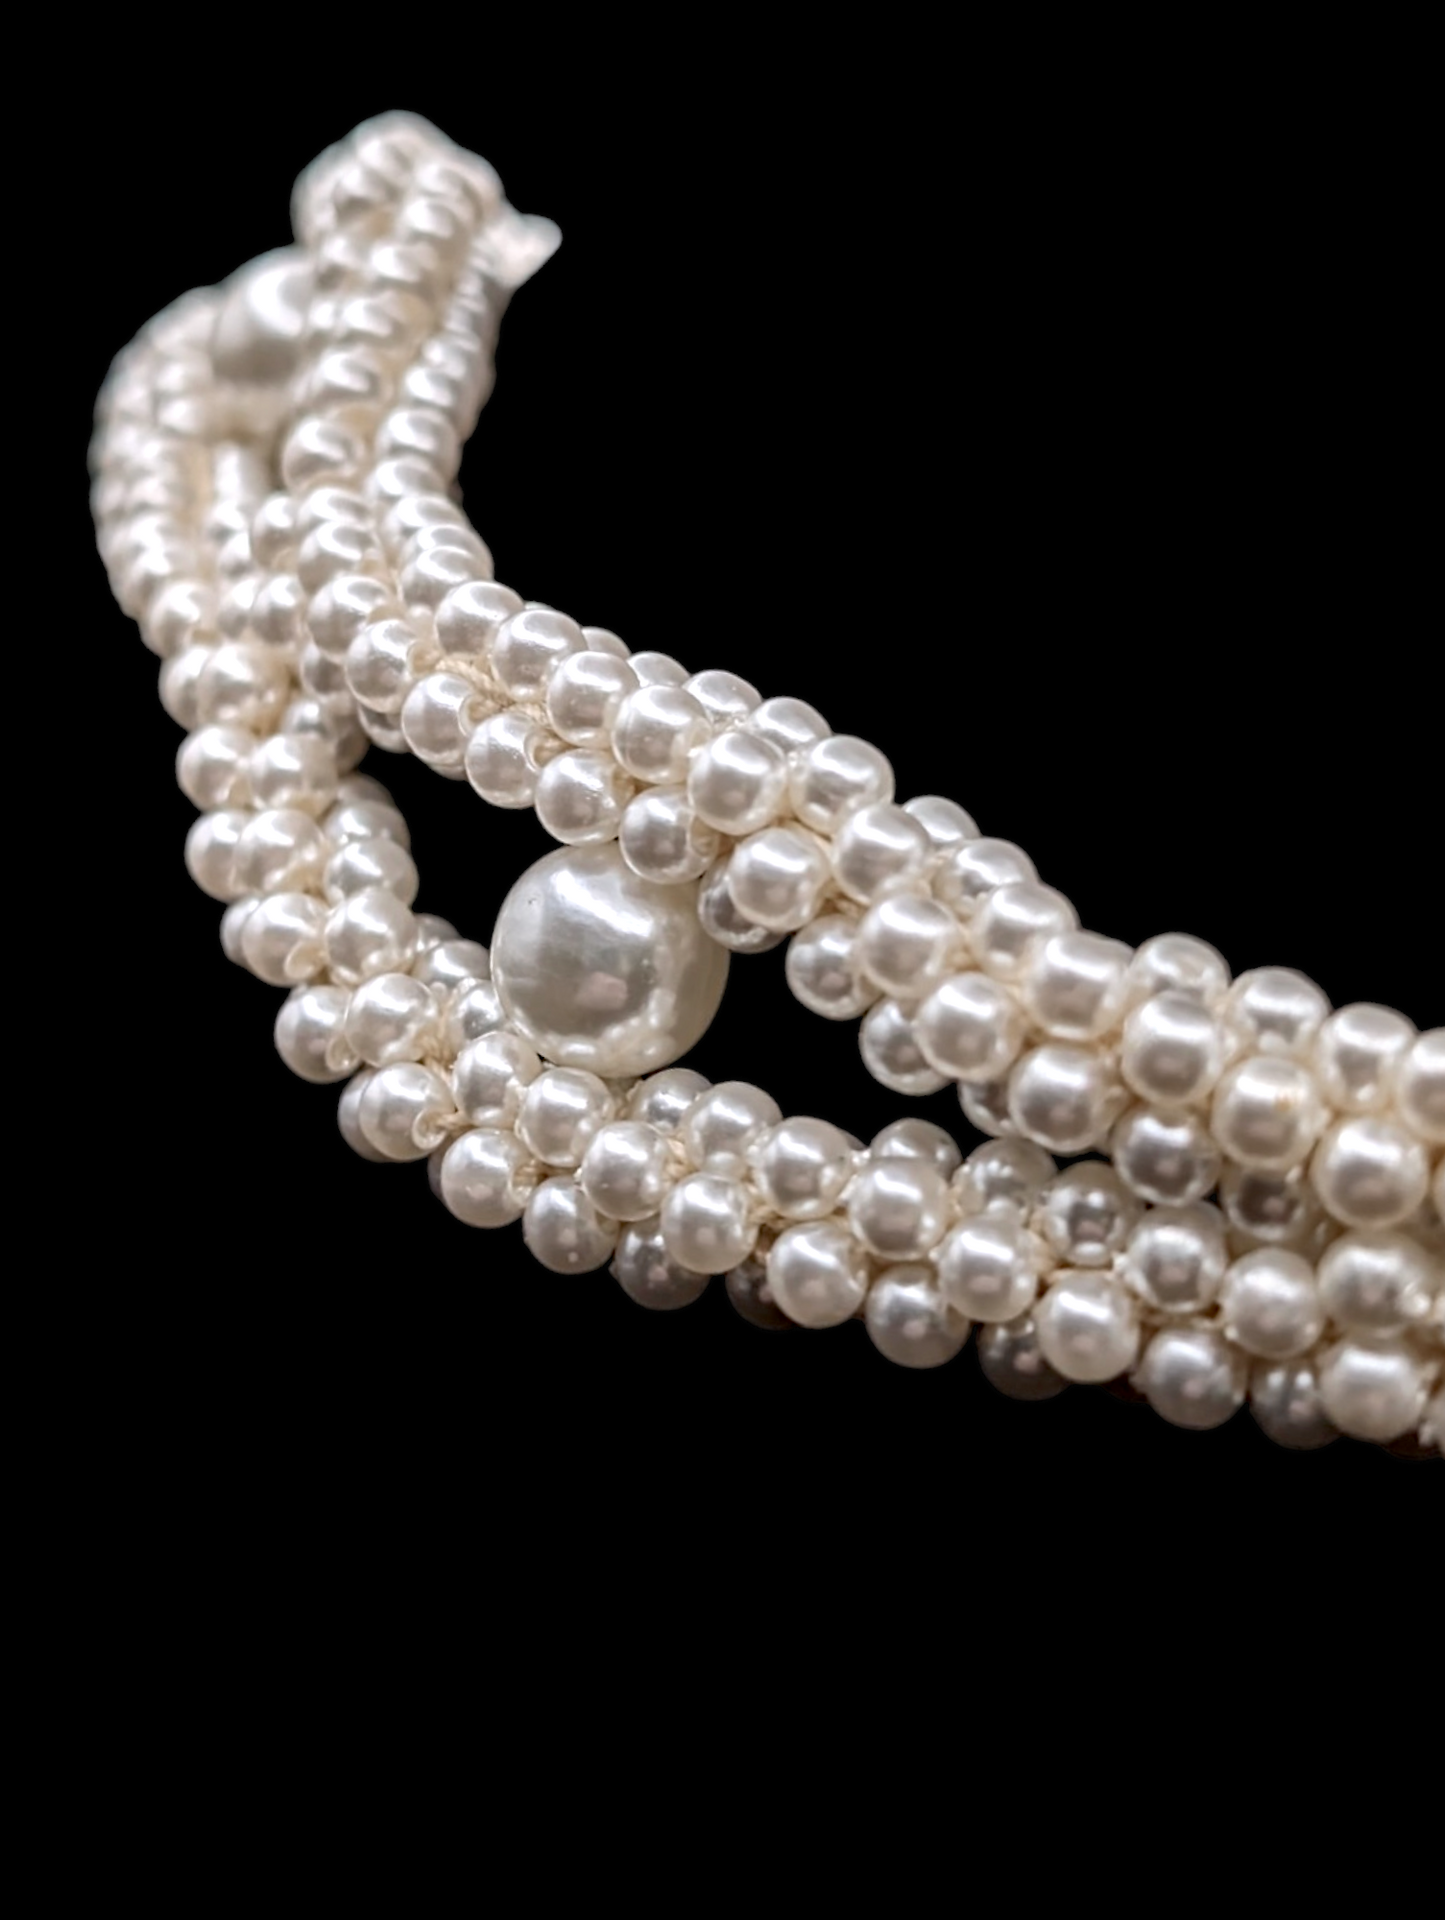 1940s-1950s Scalloped Pearl Choker Necklace